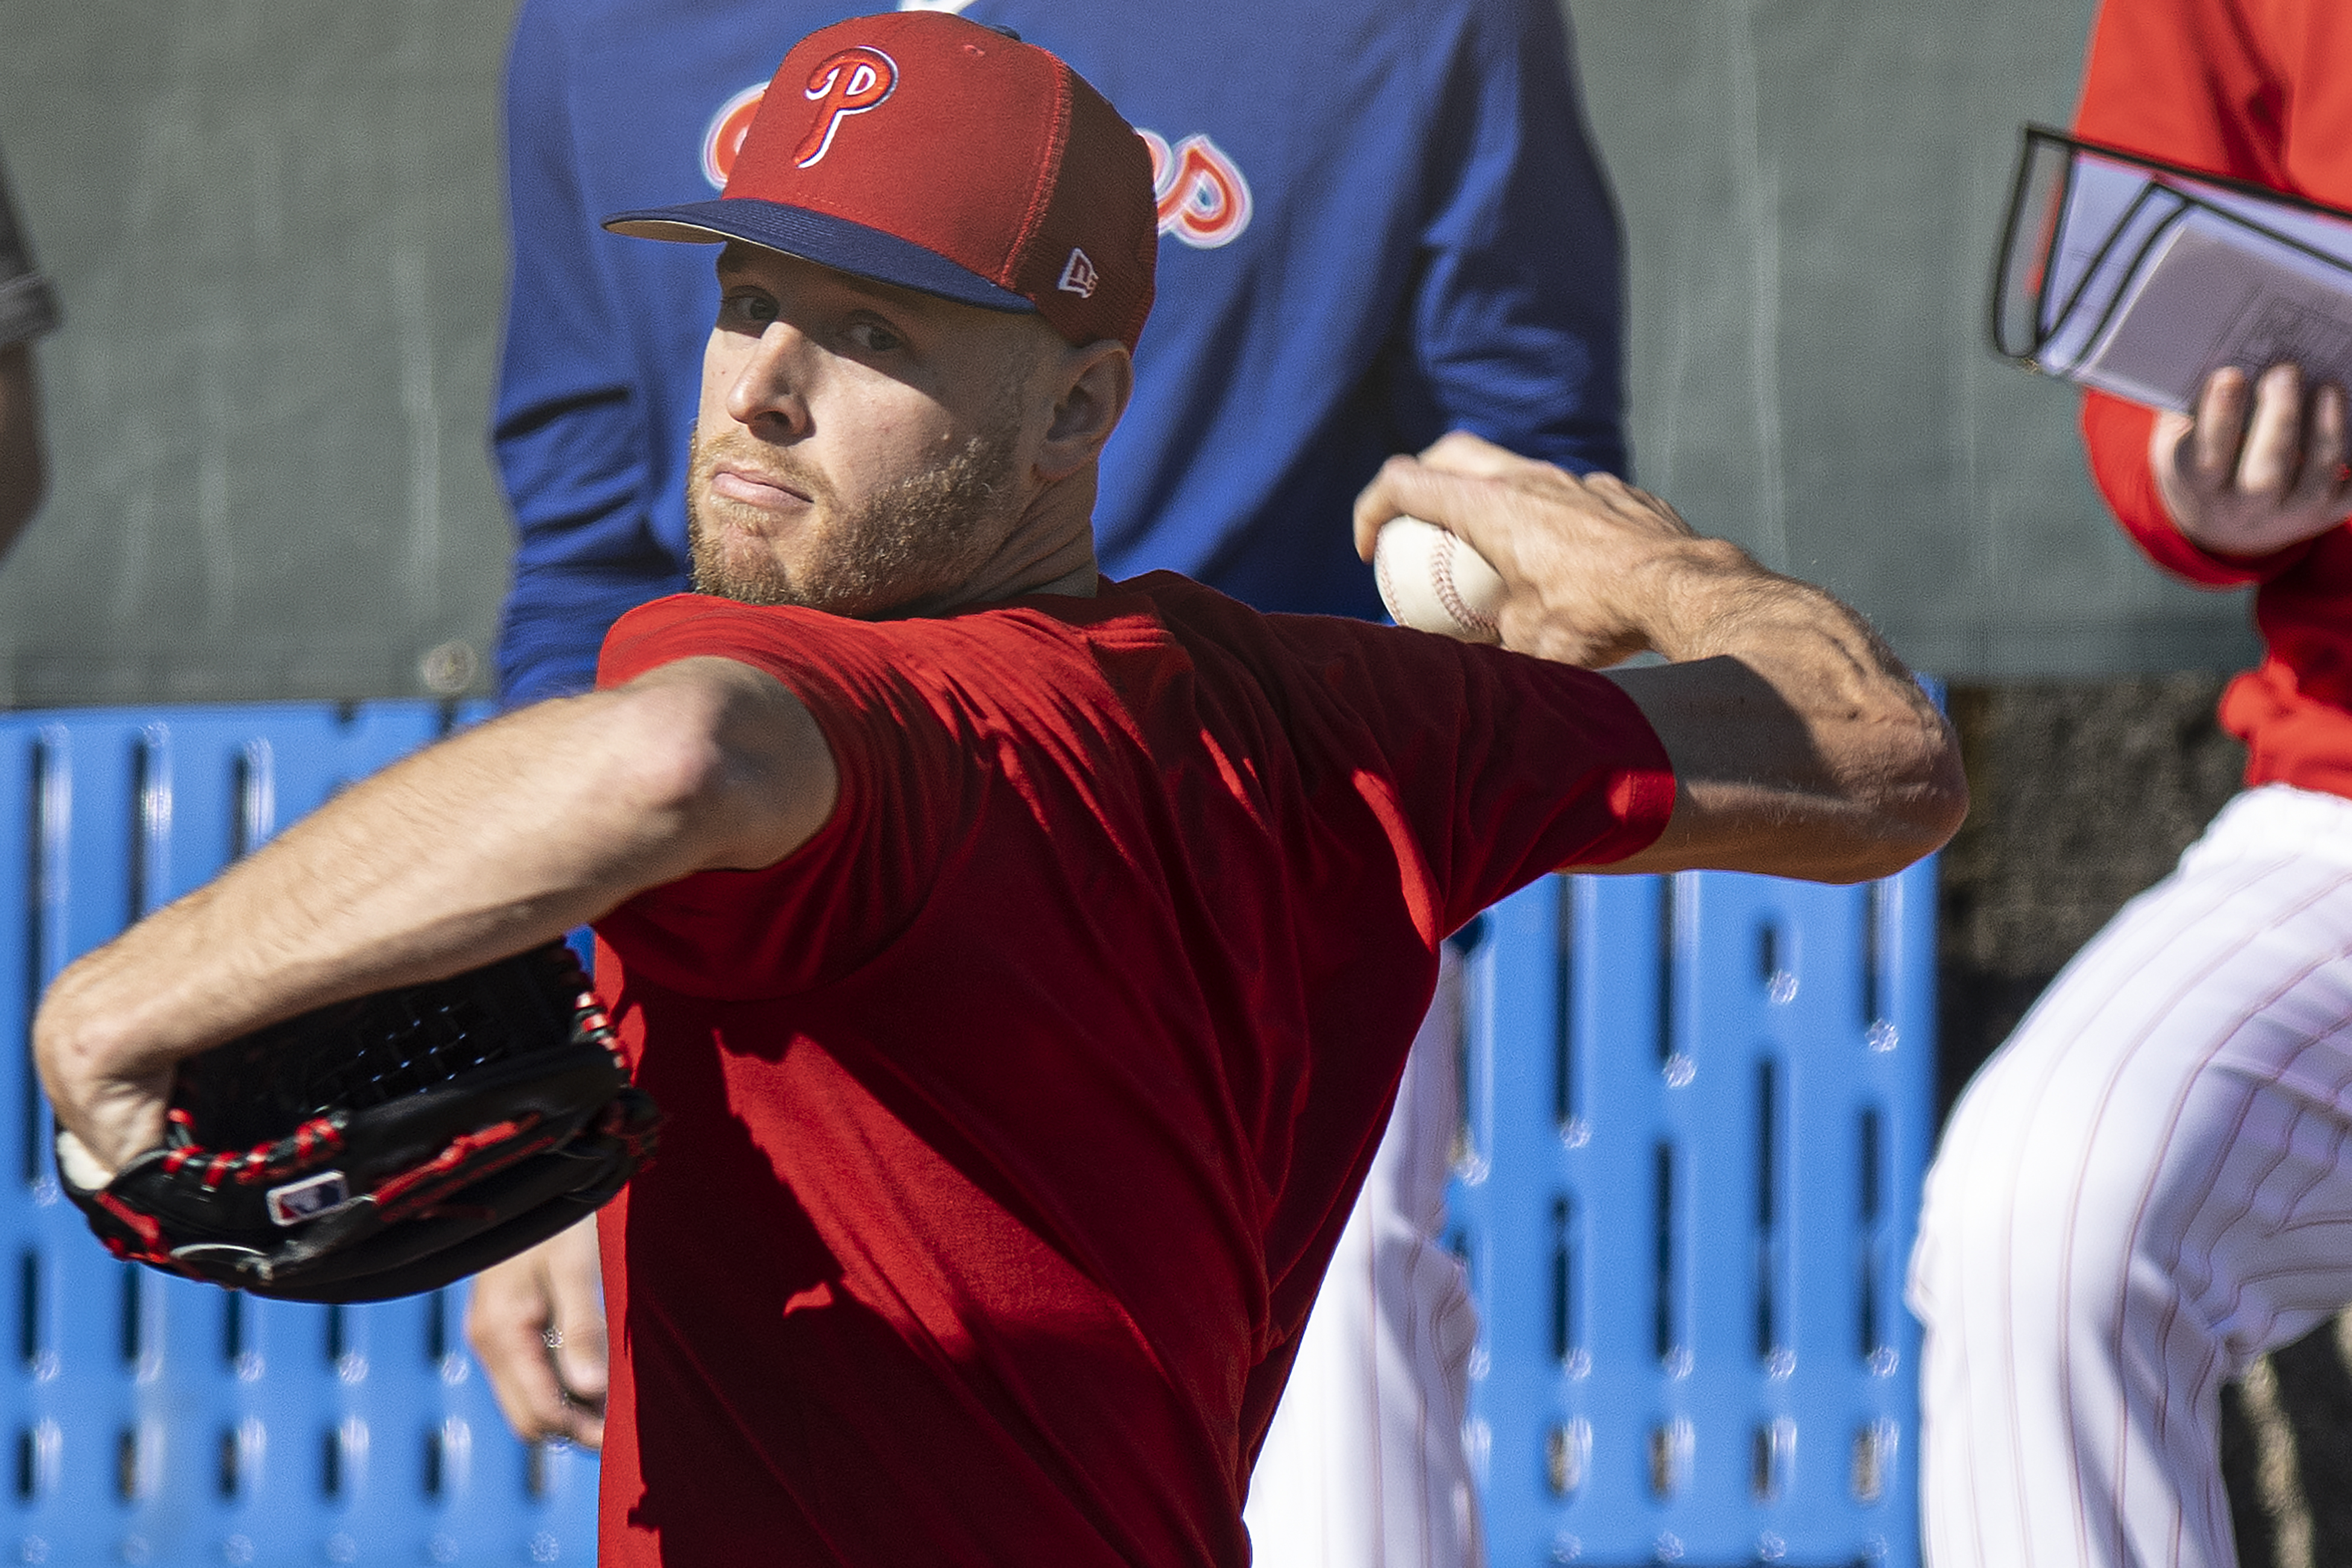 See photos from Wednesday's Phillies spring training workout